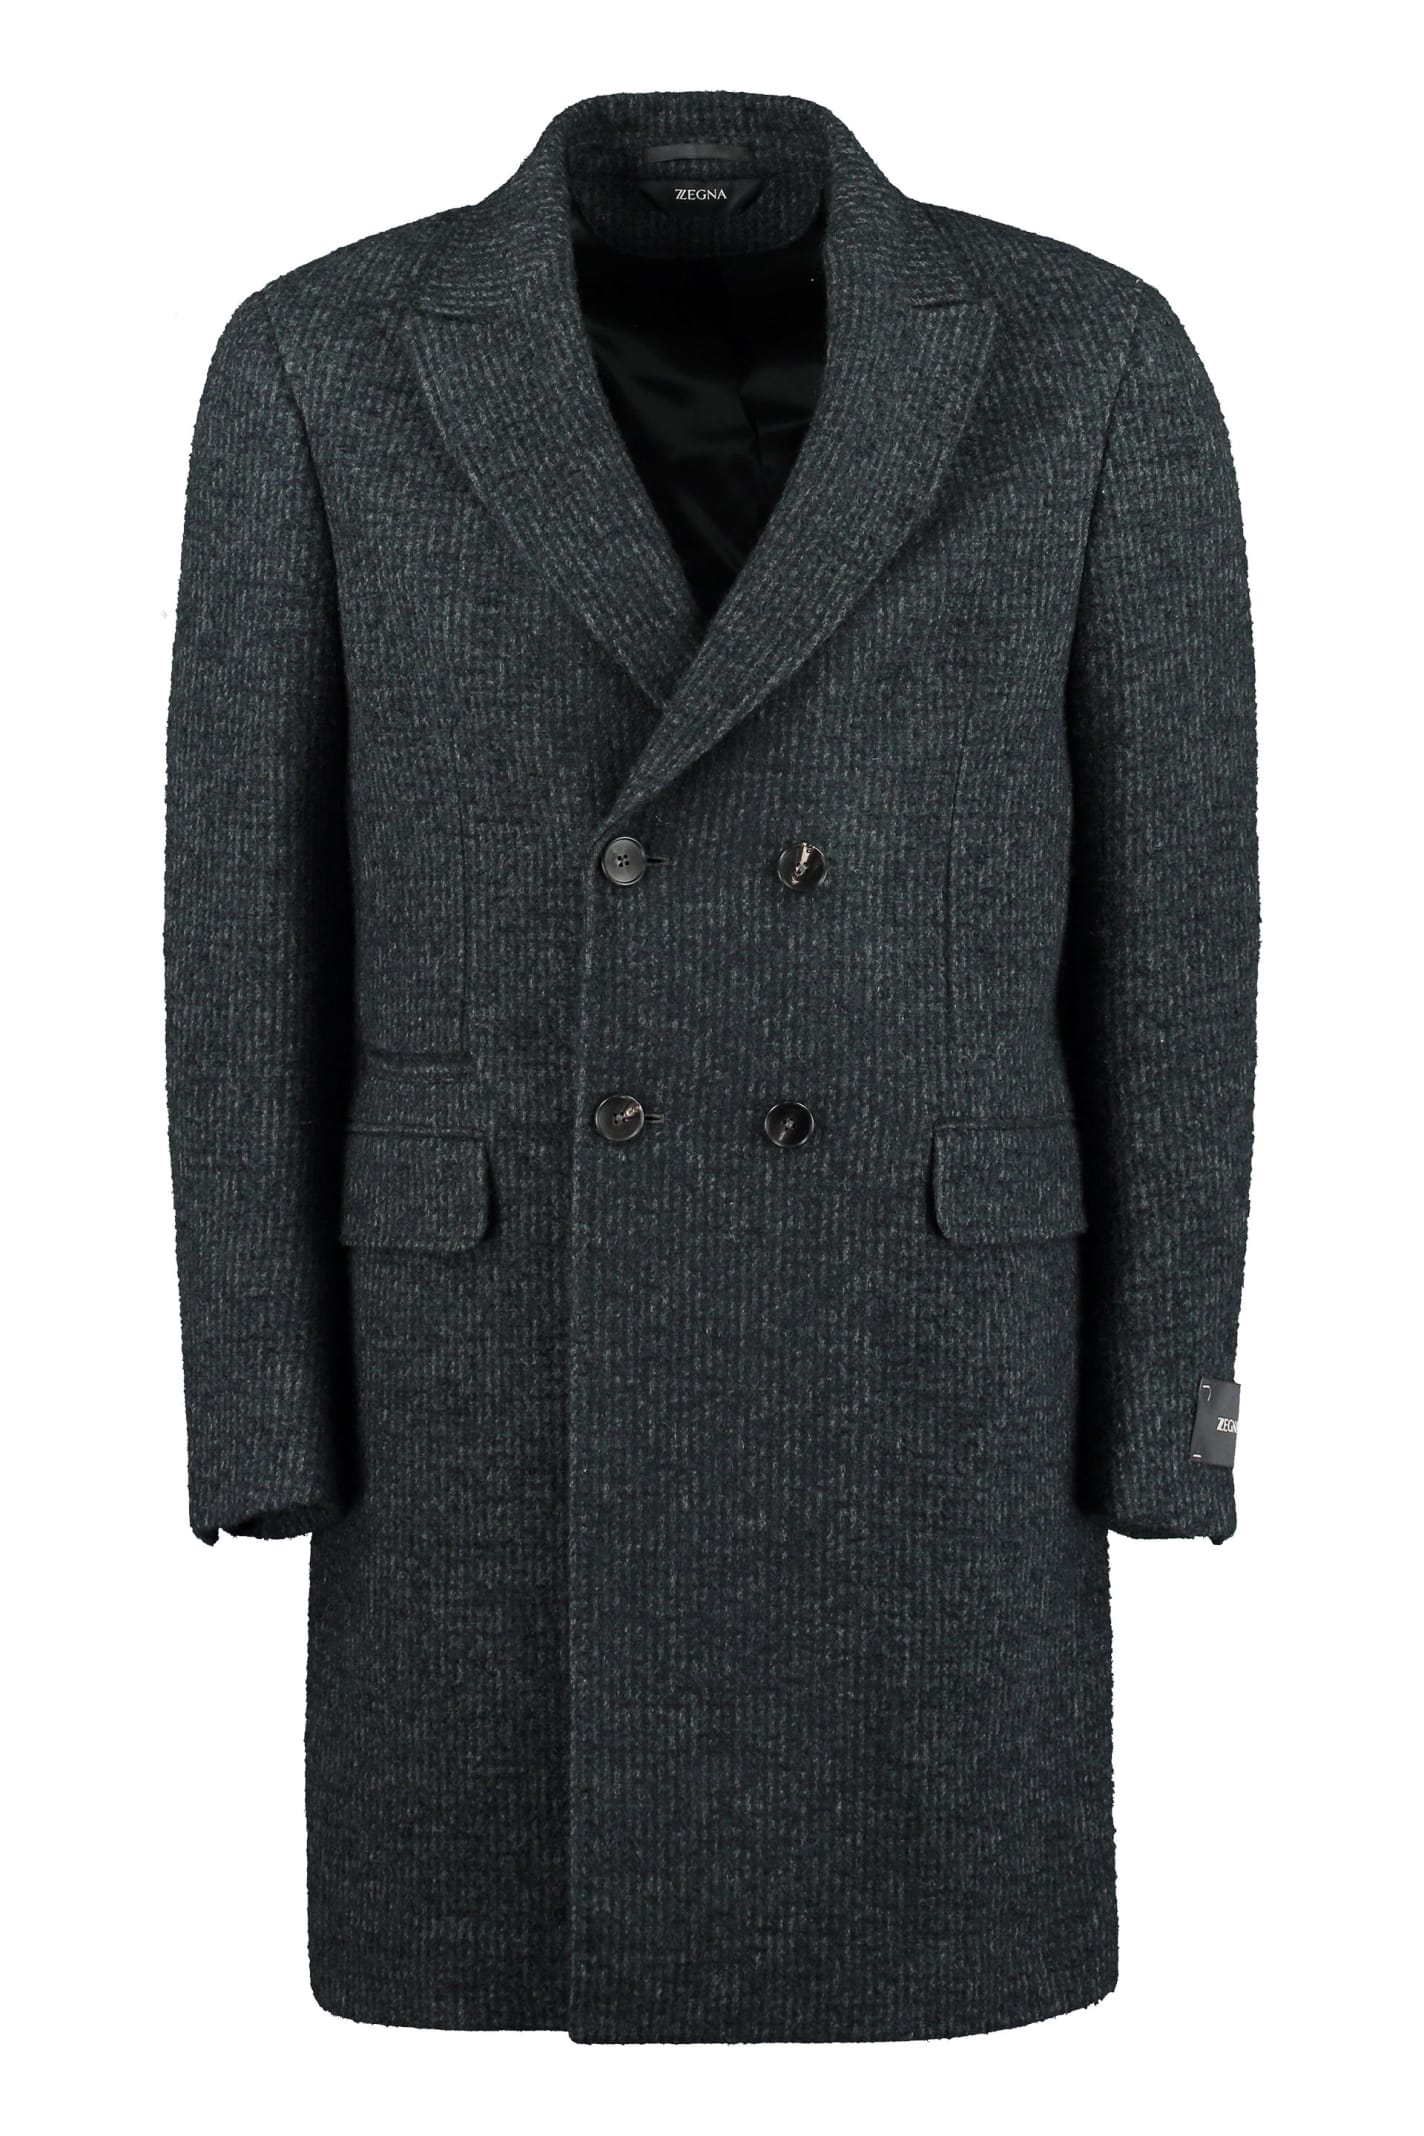 Z Zegna Wool Blend Double-breasted Coat